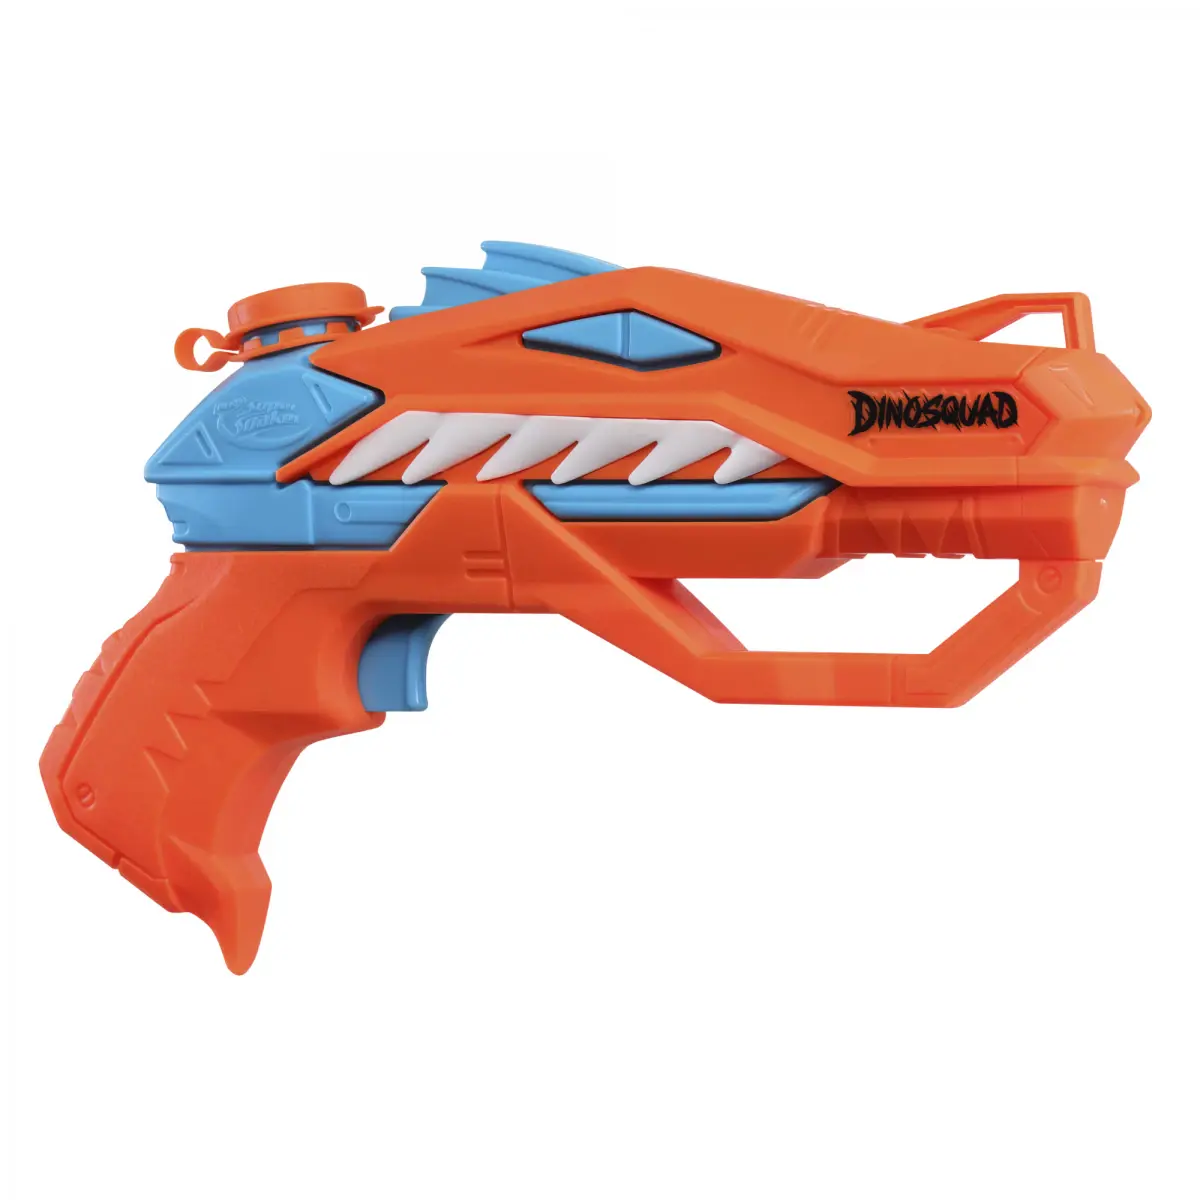 Nerf Super Soaker DinoSquad Raptor Surge Water Blaster, Trigger Fire Soakage For Outdoor Summer Water Games for 6Y+